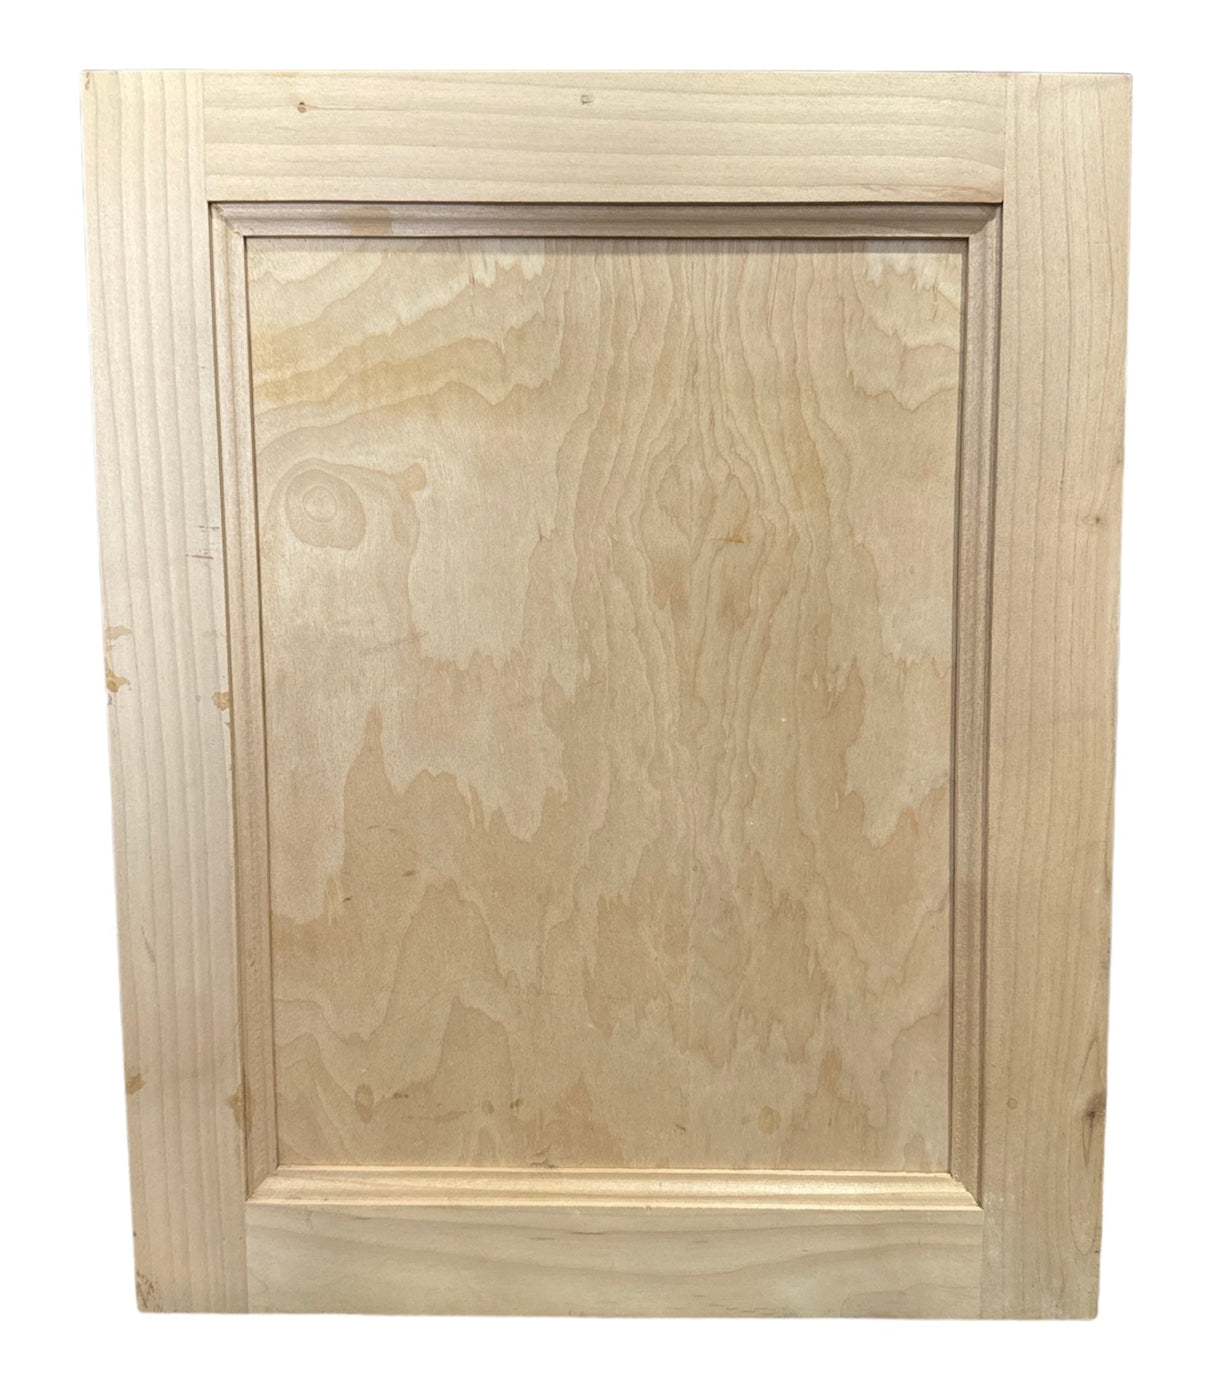 SABER SELECT 16.25 in. x 13.5 in. Unfinished Solid Wood Cabinet Door